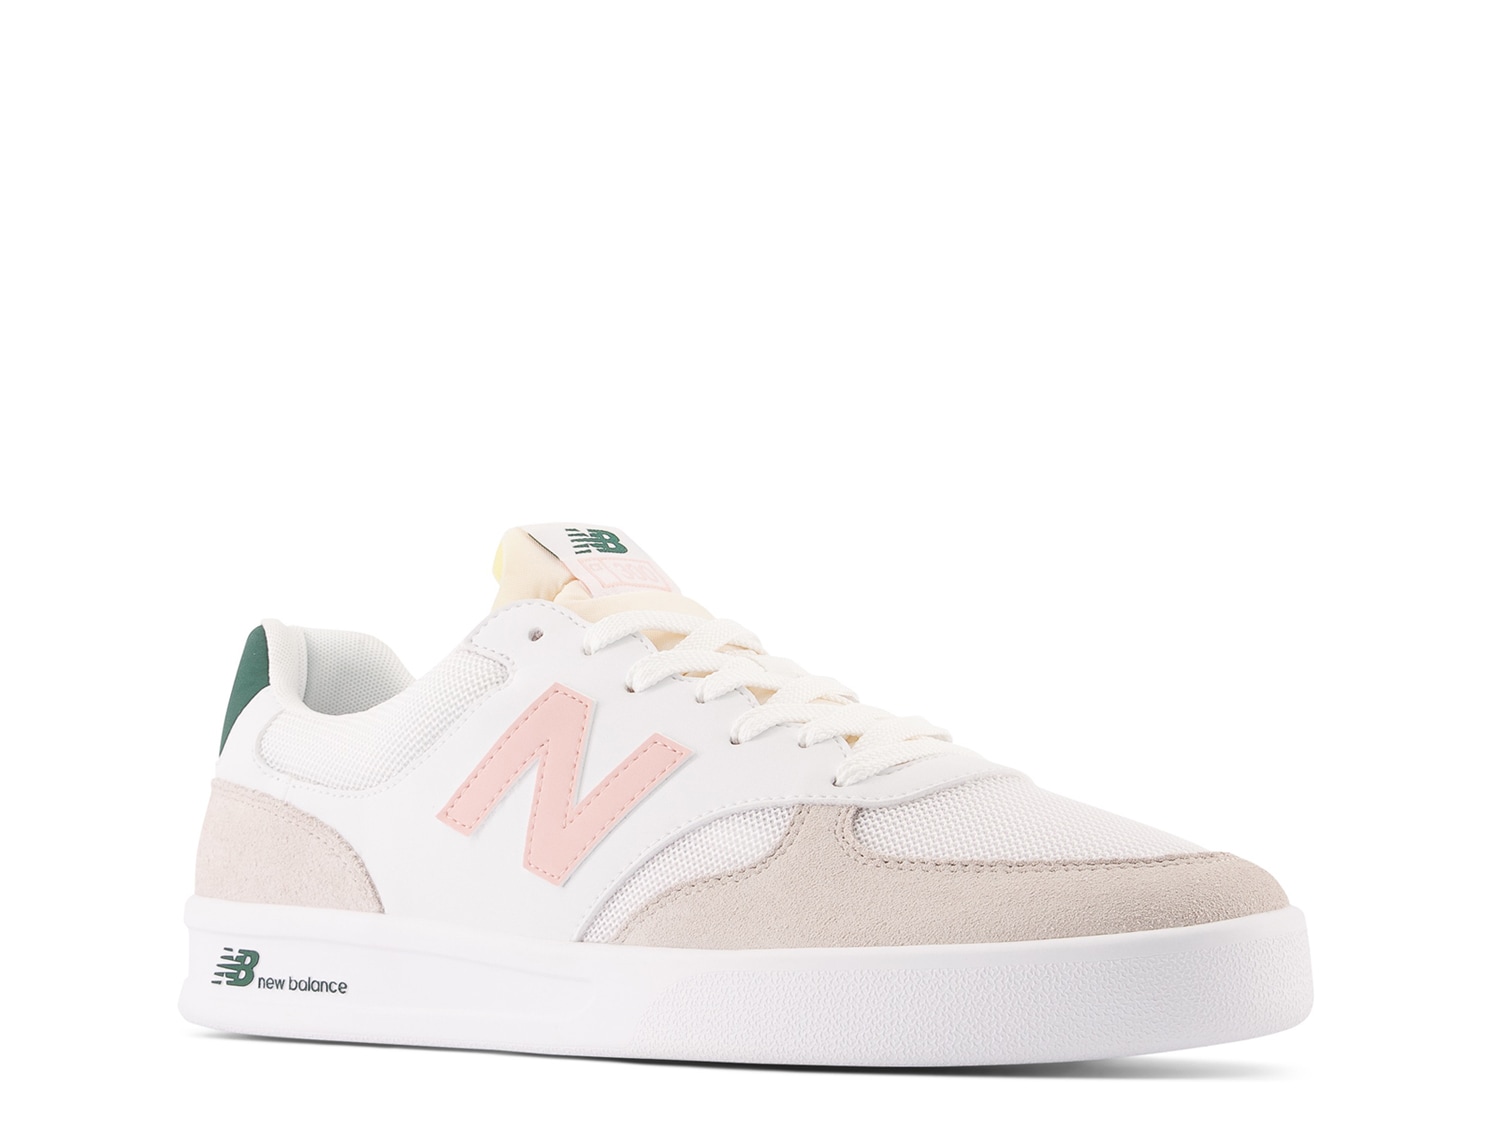 chrysanthemum Easy to understand Gain control New Balance 300 v3 Sneaker - Women's - Free Shipping | DSW